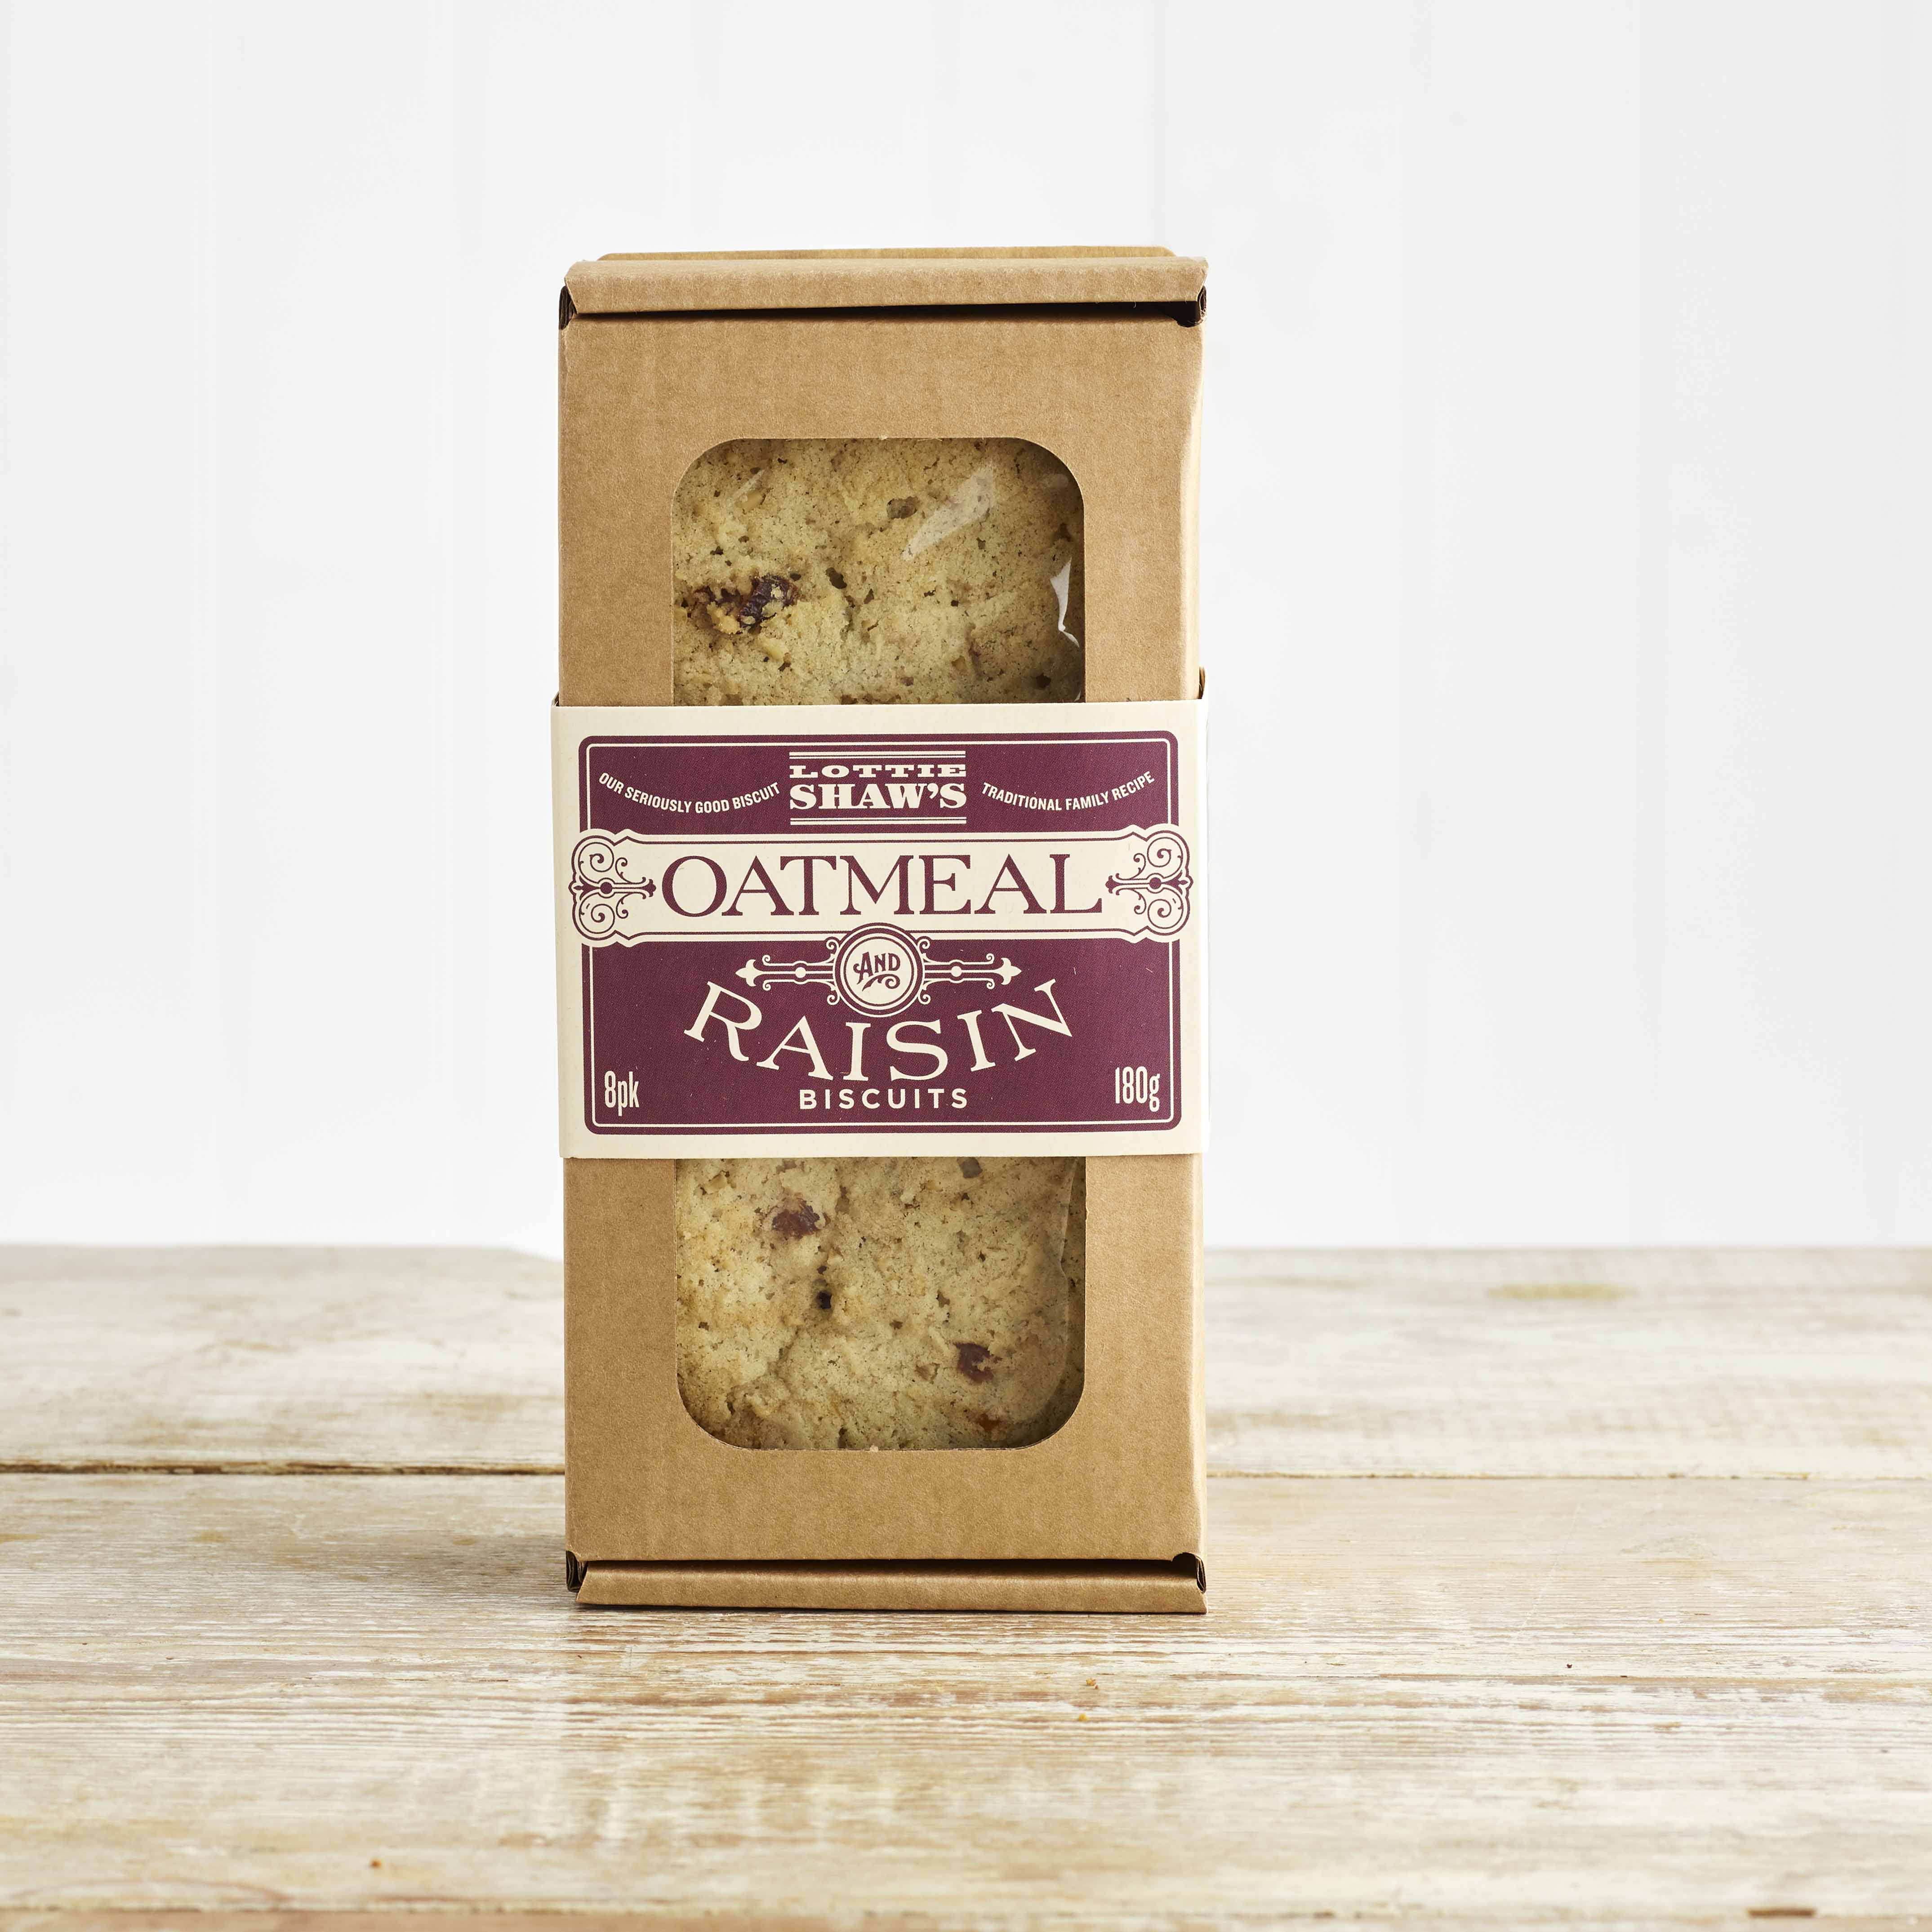 Lottie Shaw’s Oatmeal and Raisin Biscuits, 180g